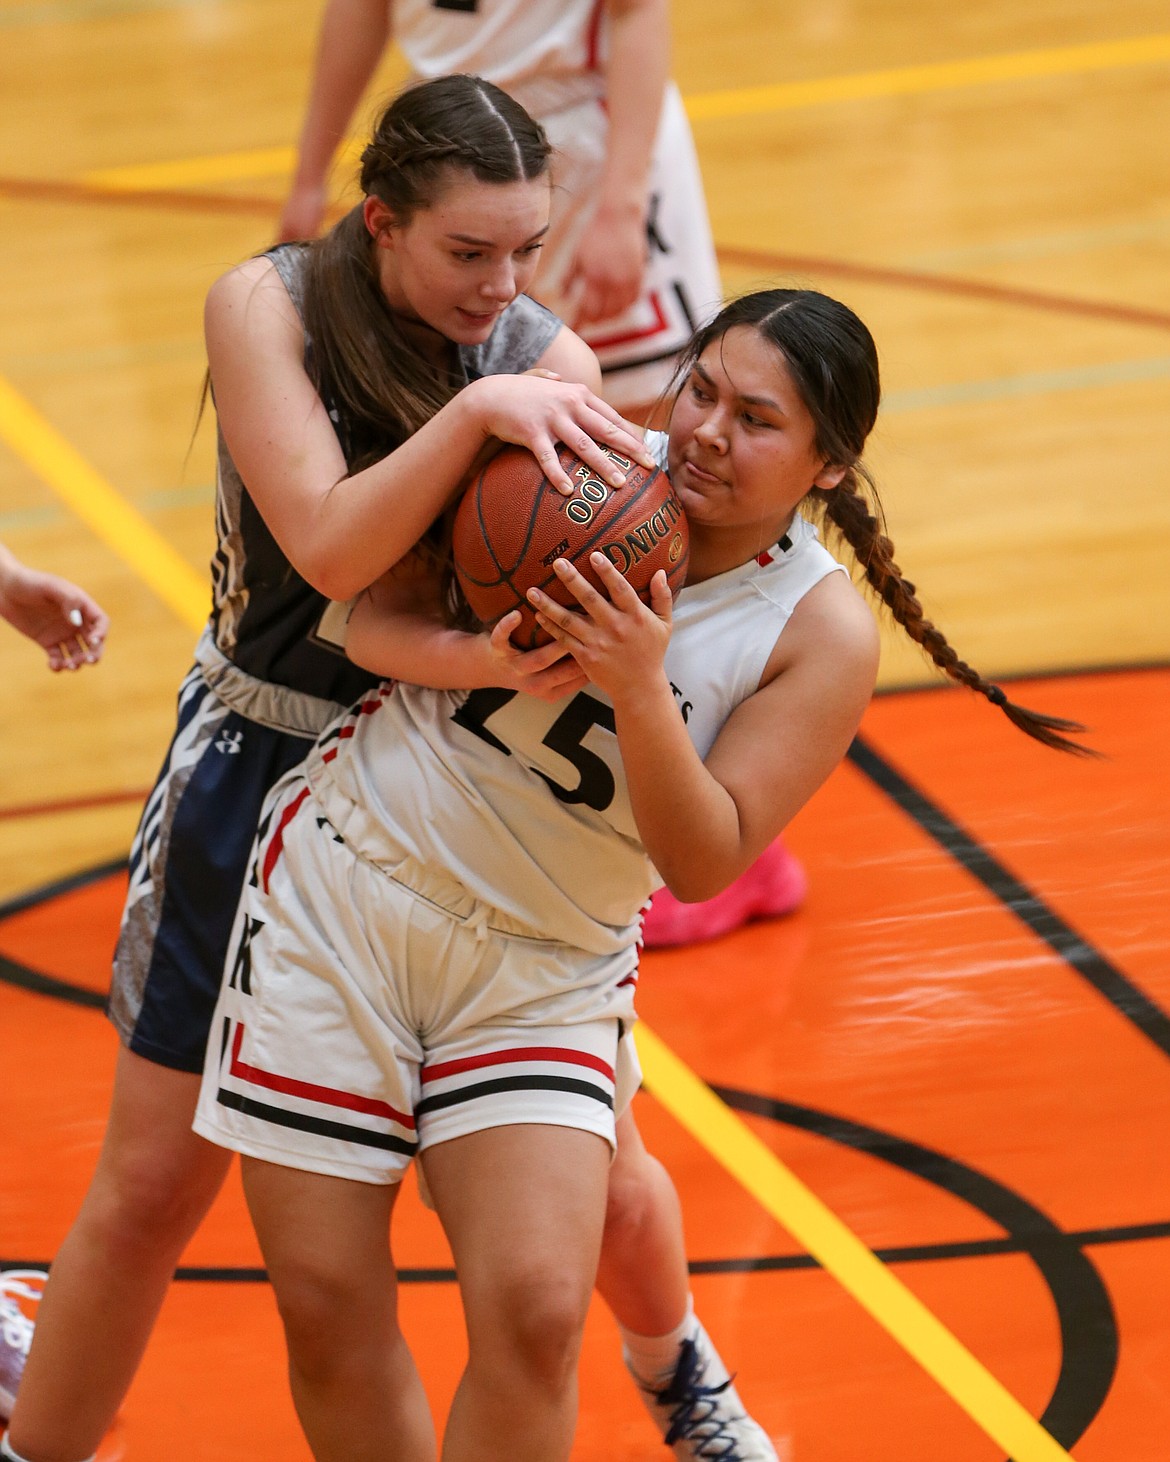 JASON DUCHOW PHOTOGRAPHY
Kria Peters (25) of Lakeside and Kynlee Thornton of Lighthouse Christian wrestle for the ball on Wednesday in a first-round game of the state 1A Division I girls basketball tournament at Columbia High in Nampa.